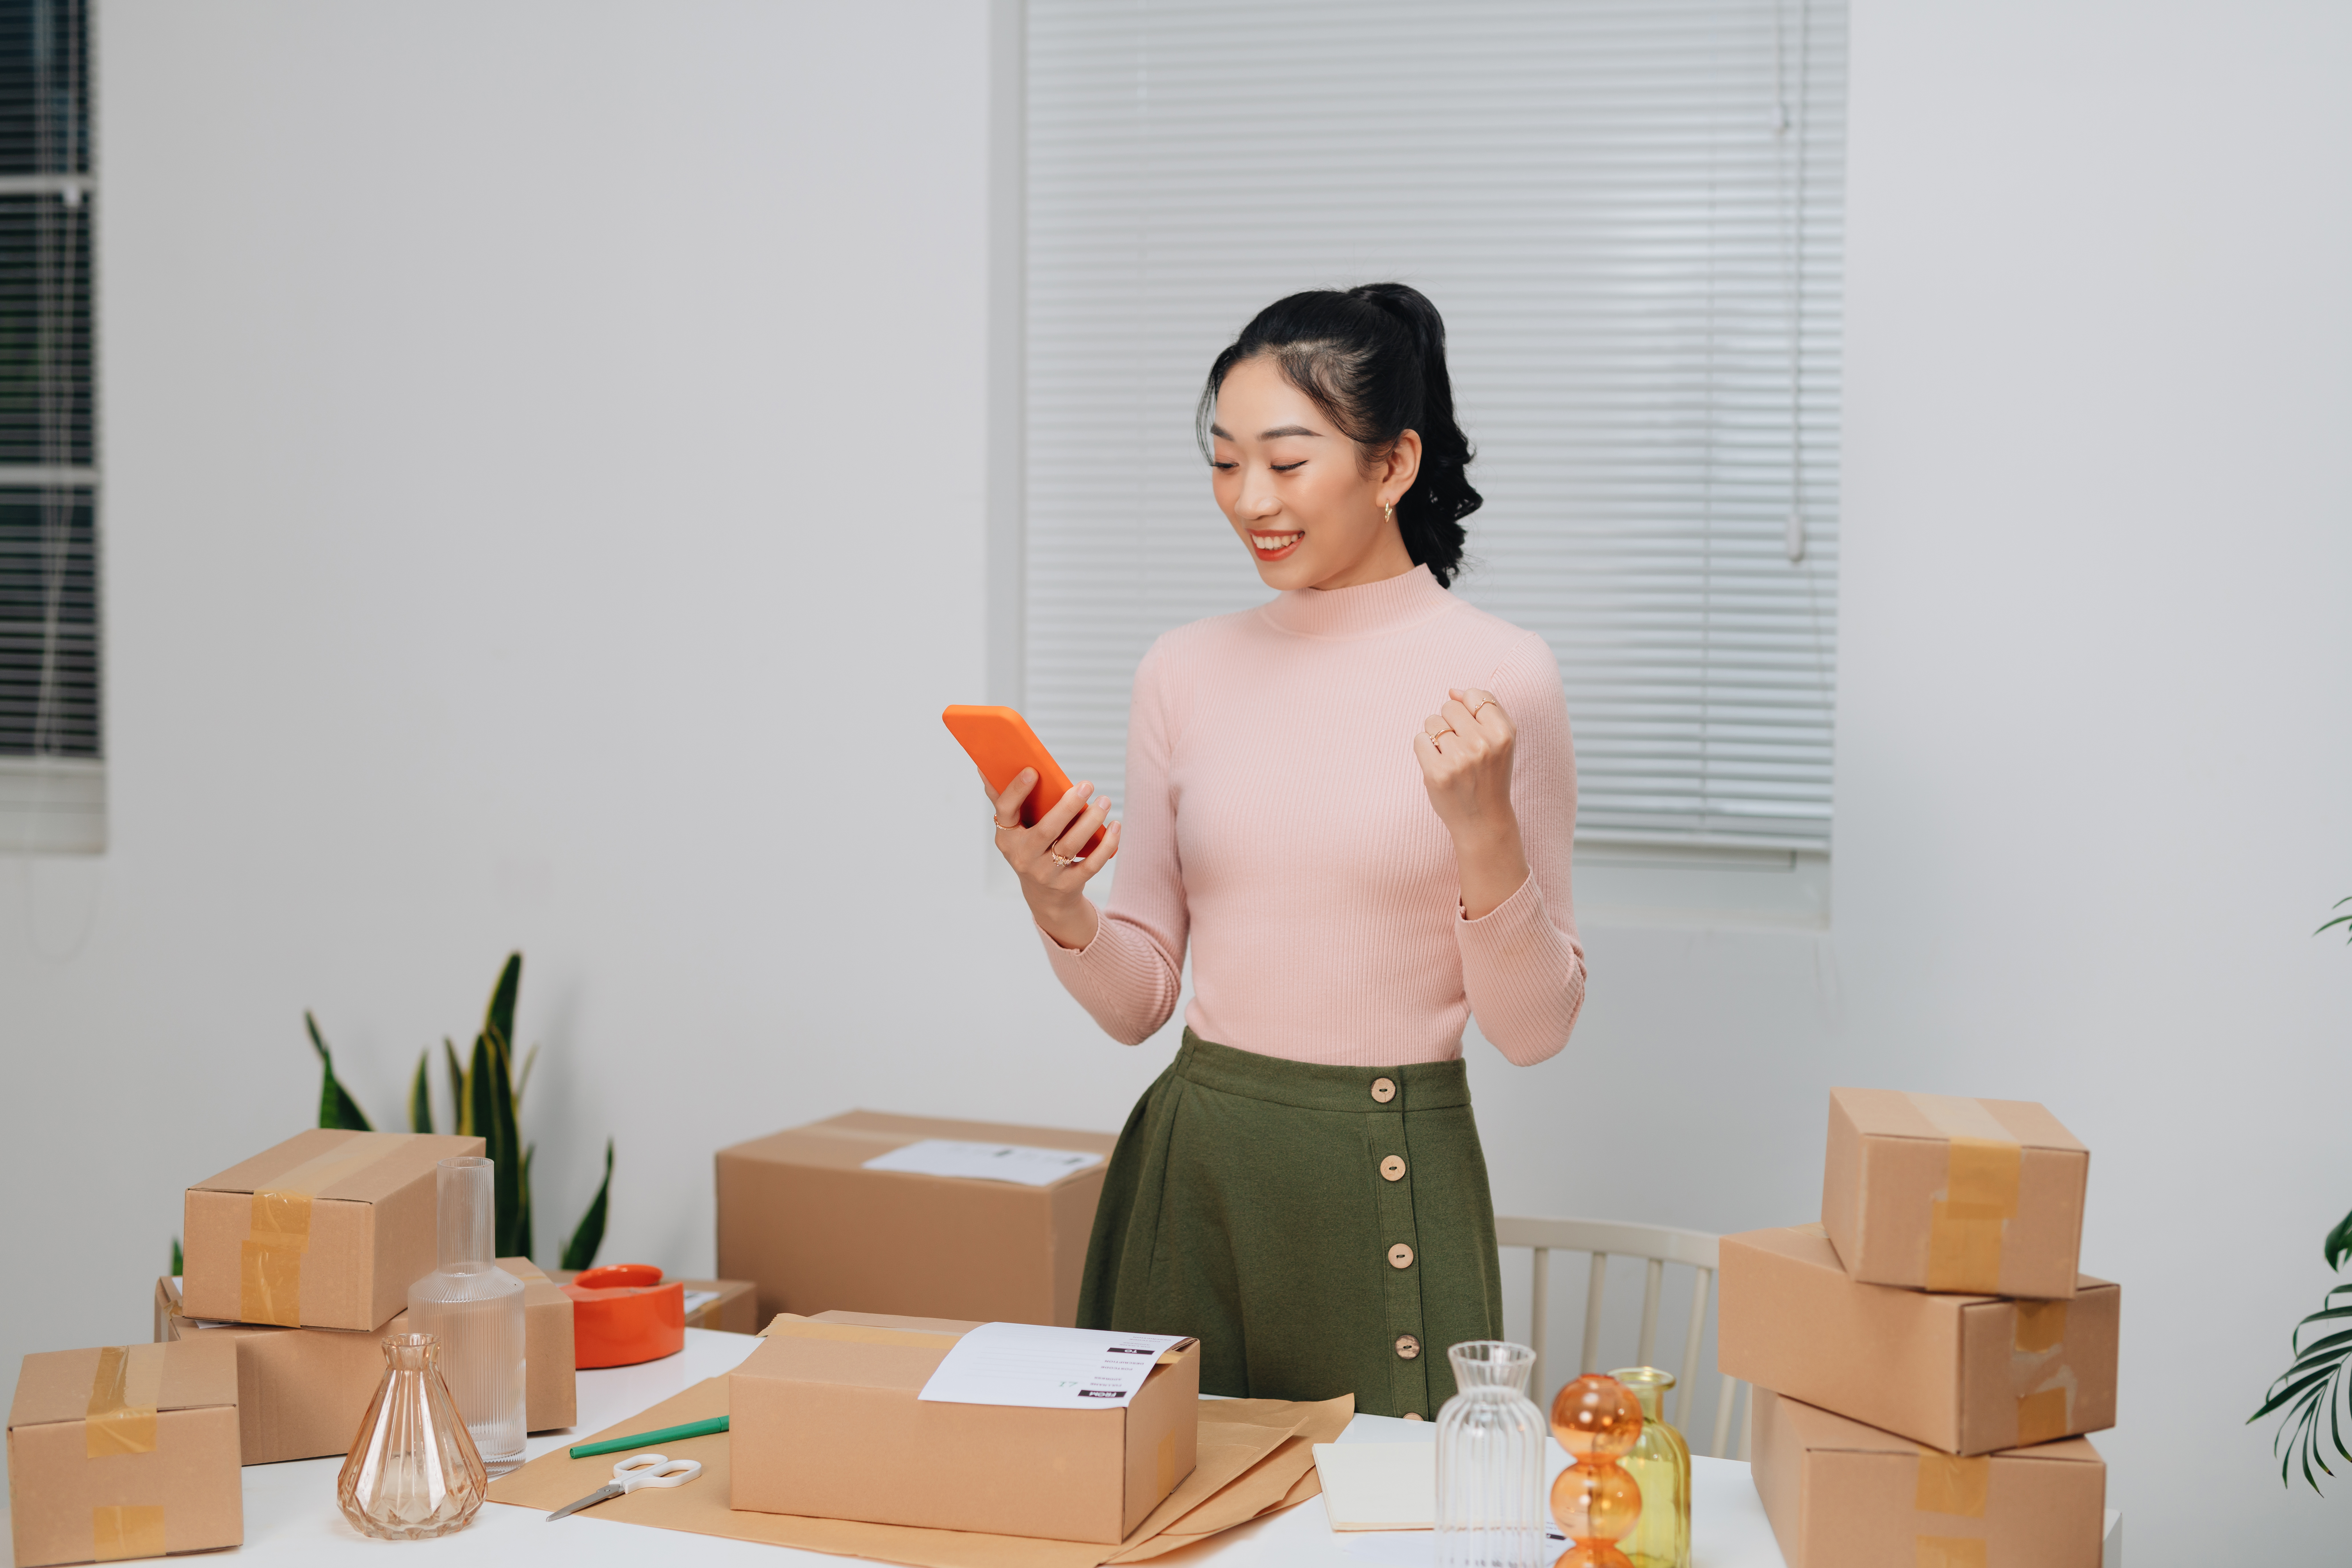 woman surrounded by boxes looking at her phone smiling